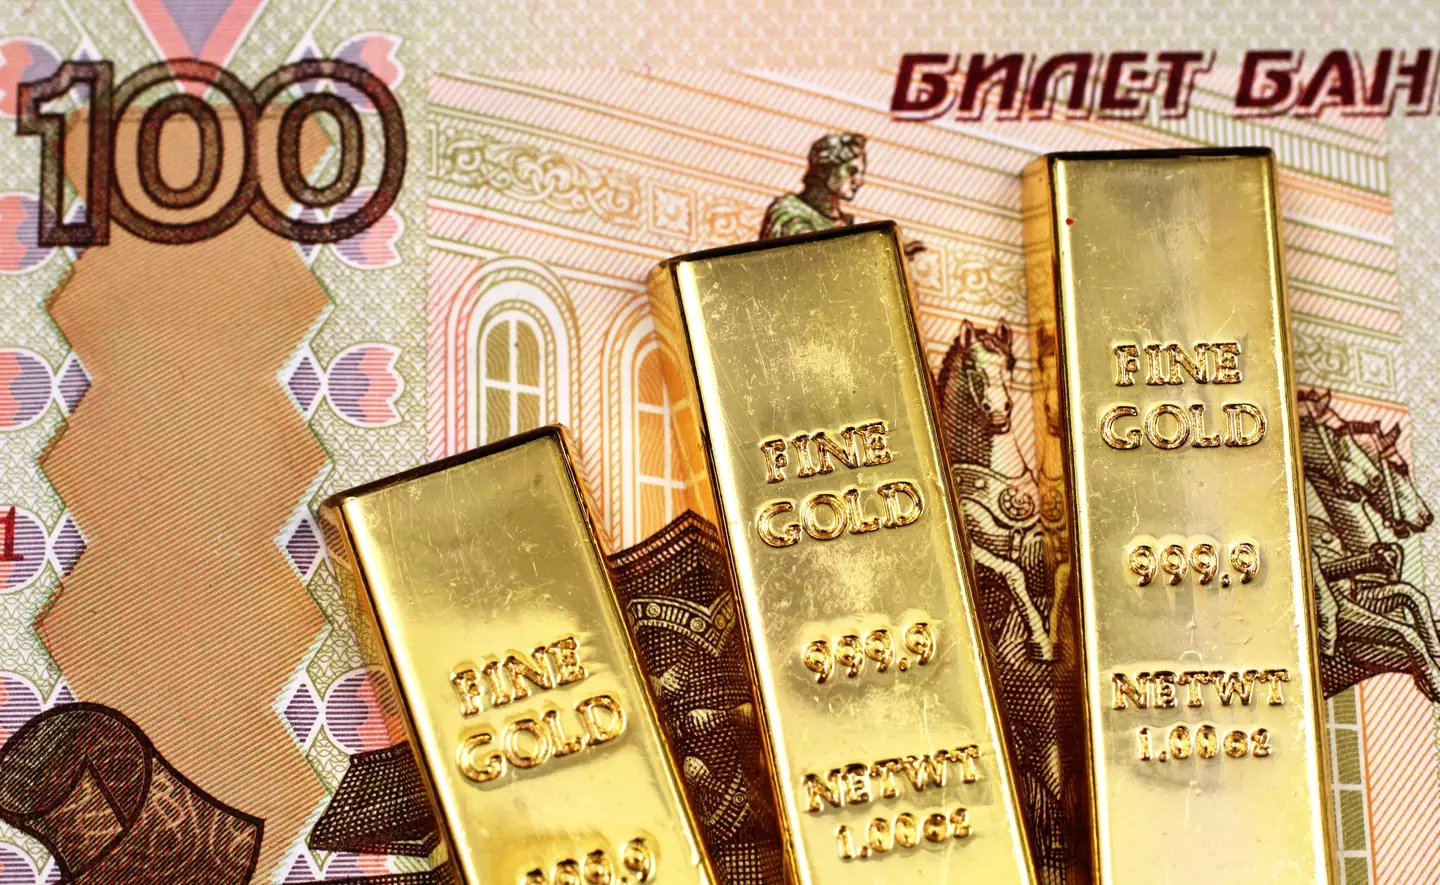 A hundred Russian ruble bank note with three small golden ingots in macro close up.